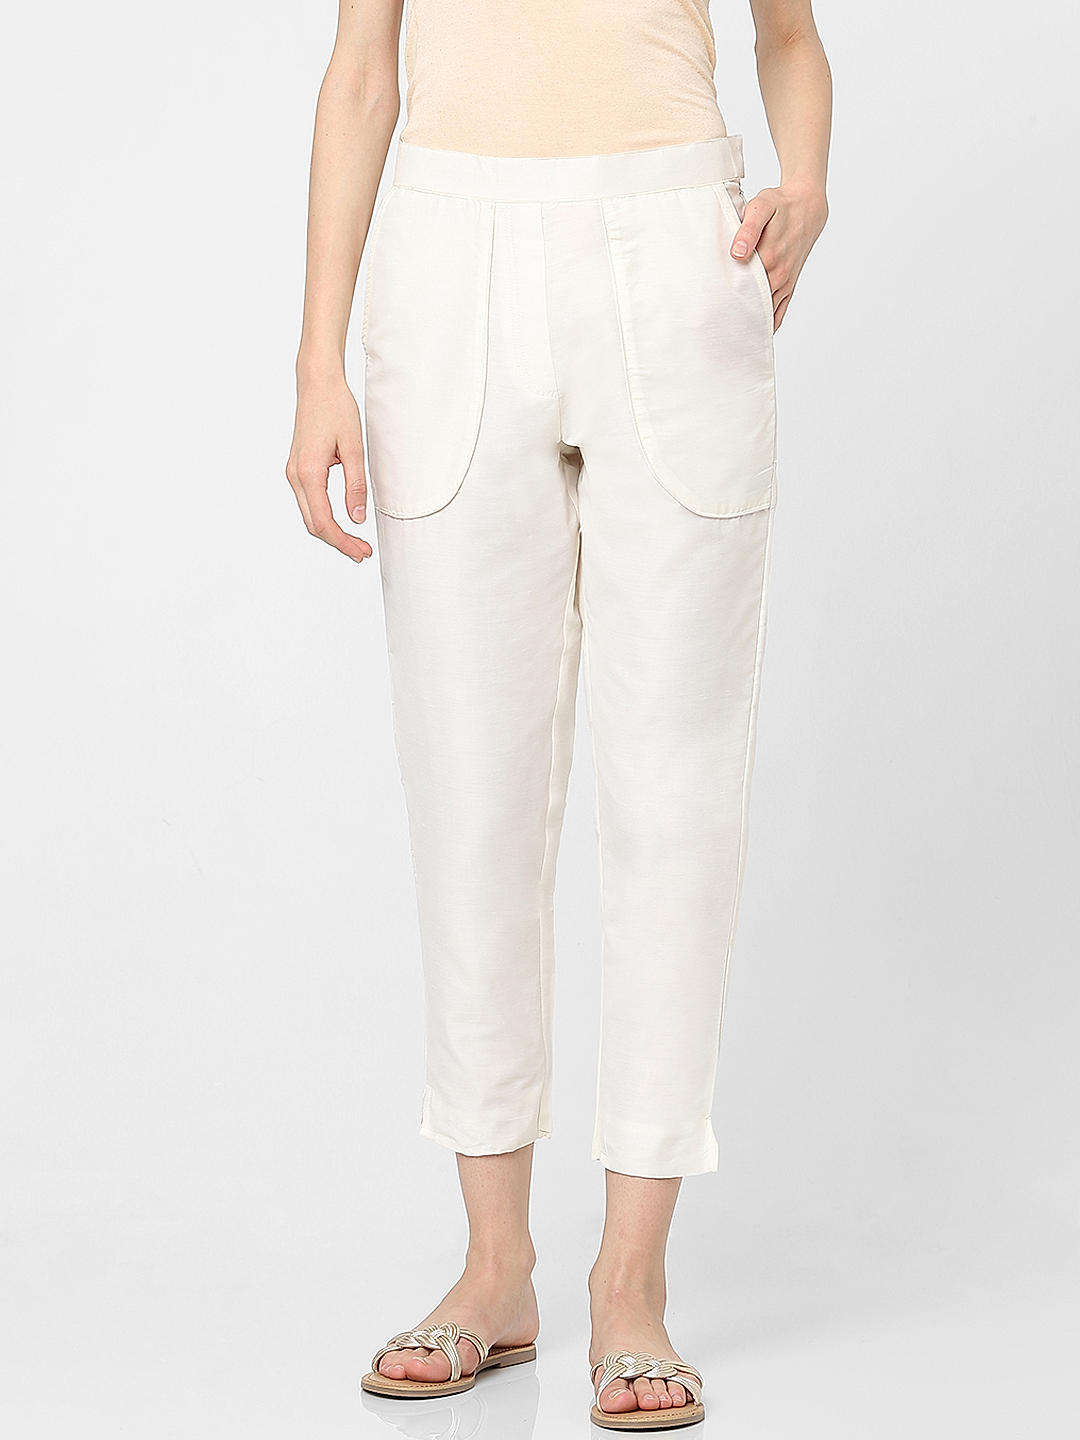 White Bottoms for Women – Buy White Indo Western Pants for Girls Online  India – Indya